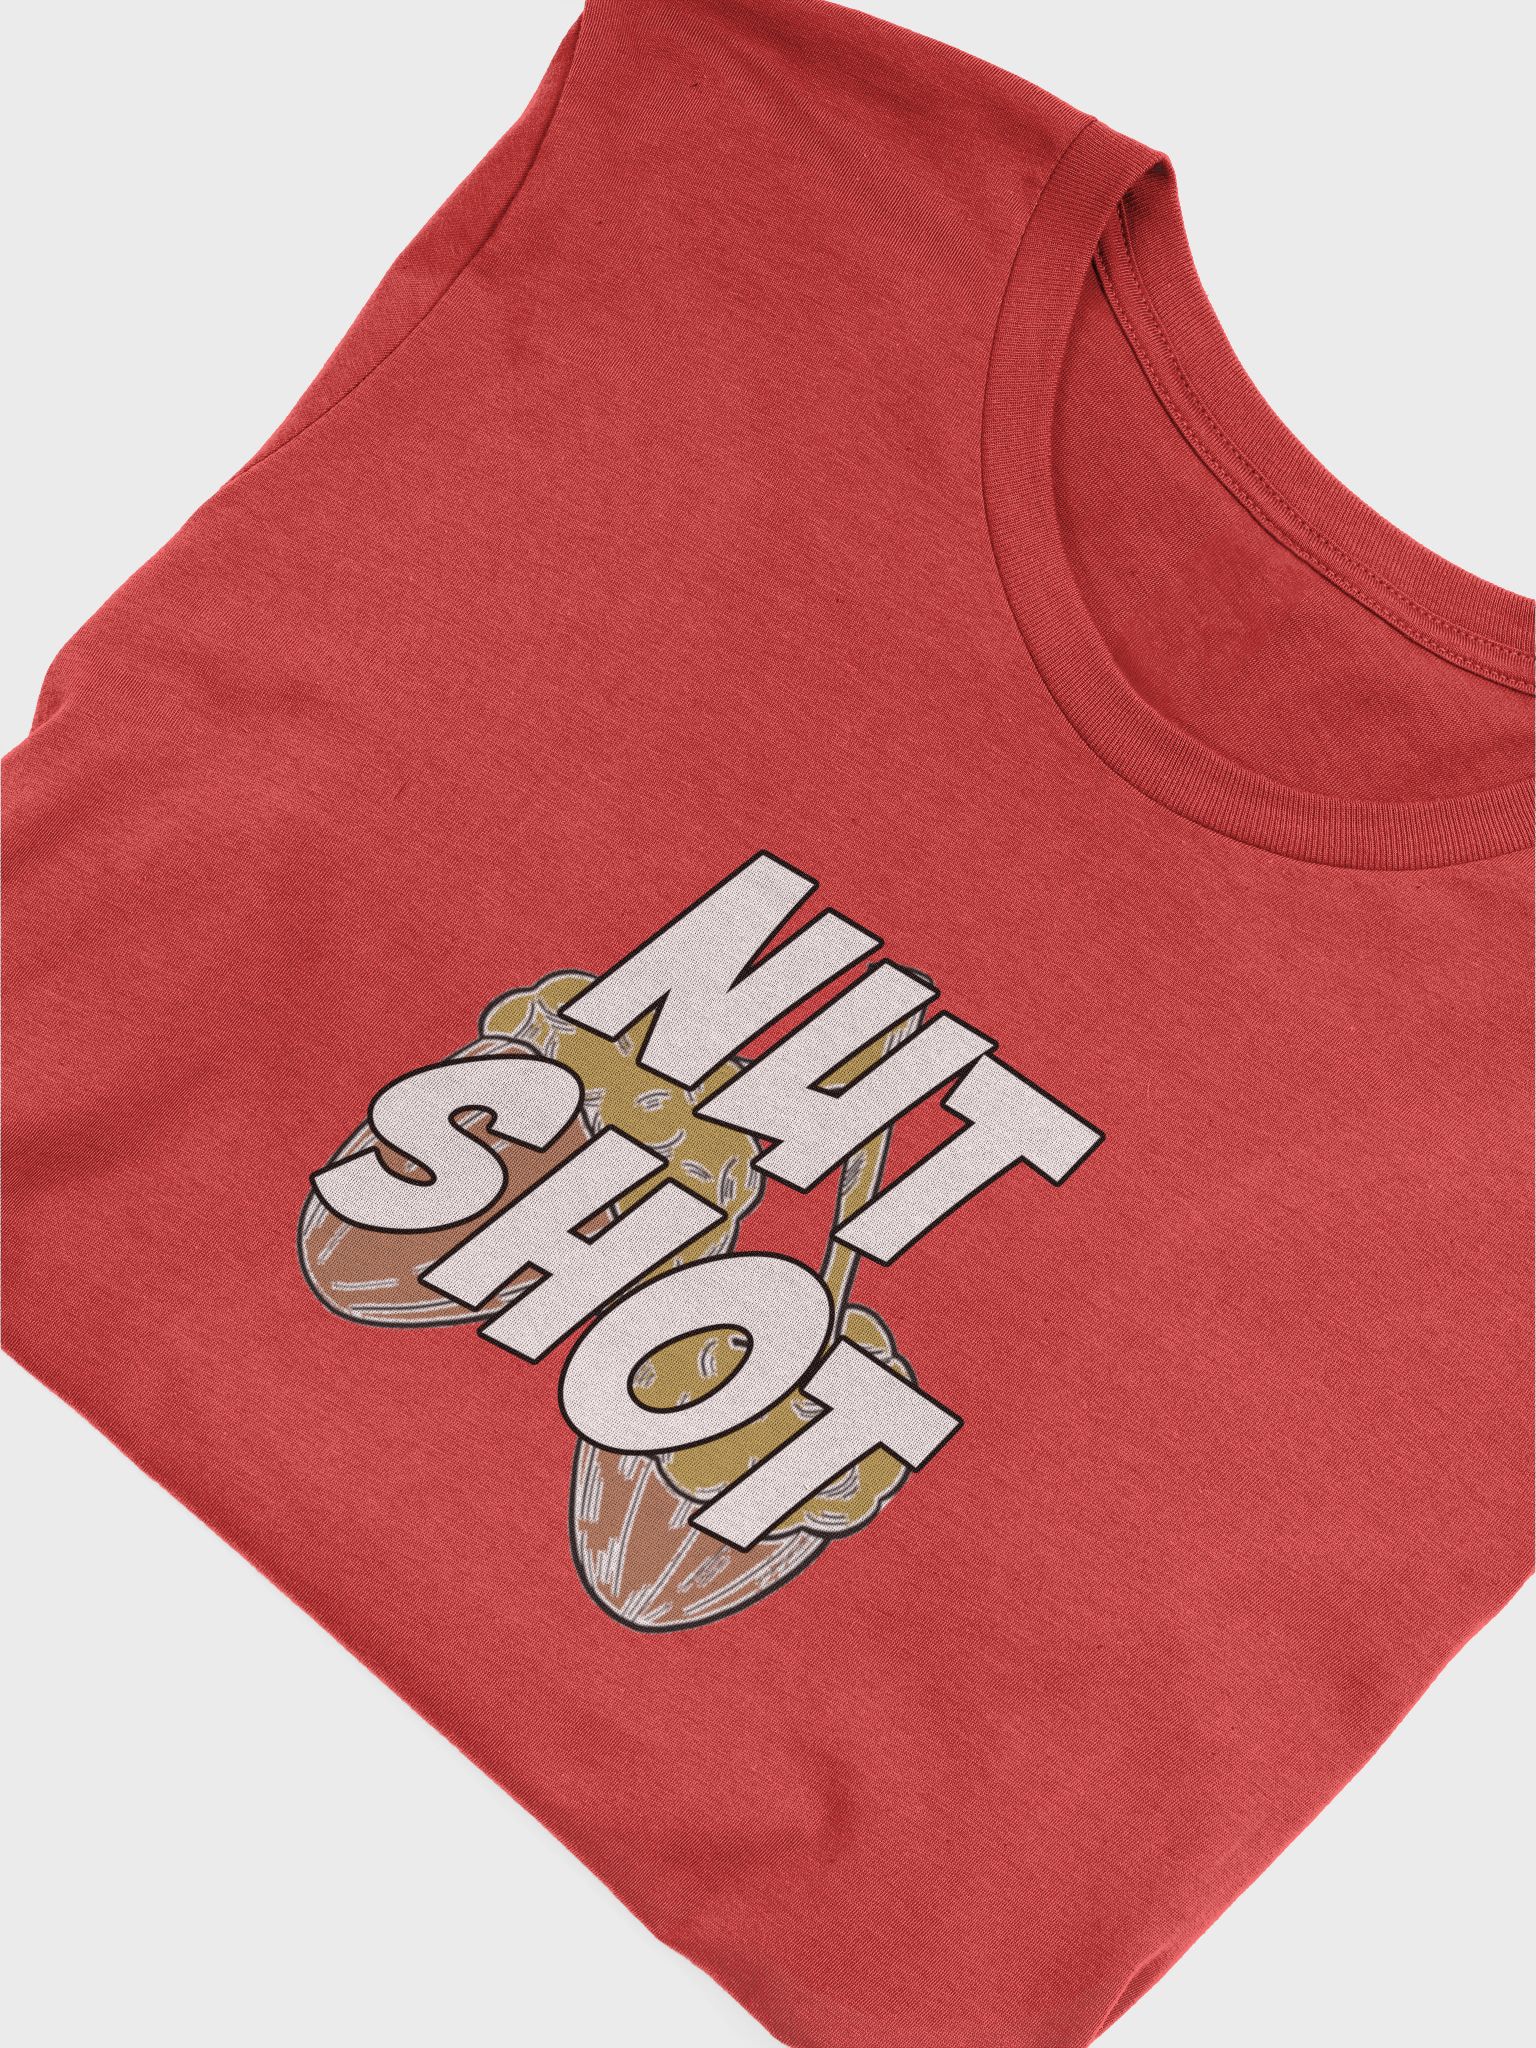 Tater Nuts Premium T-Shirt for Sale by haleyepping